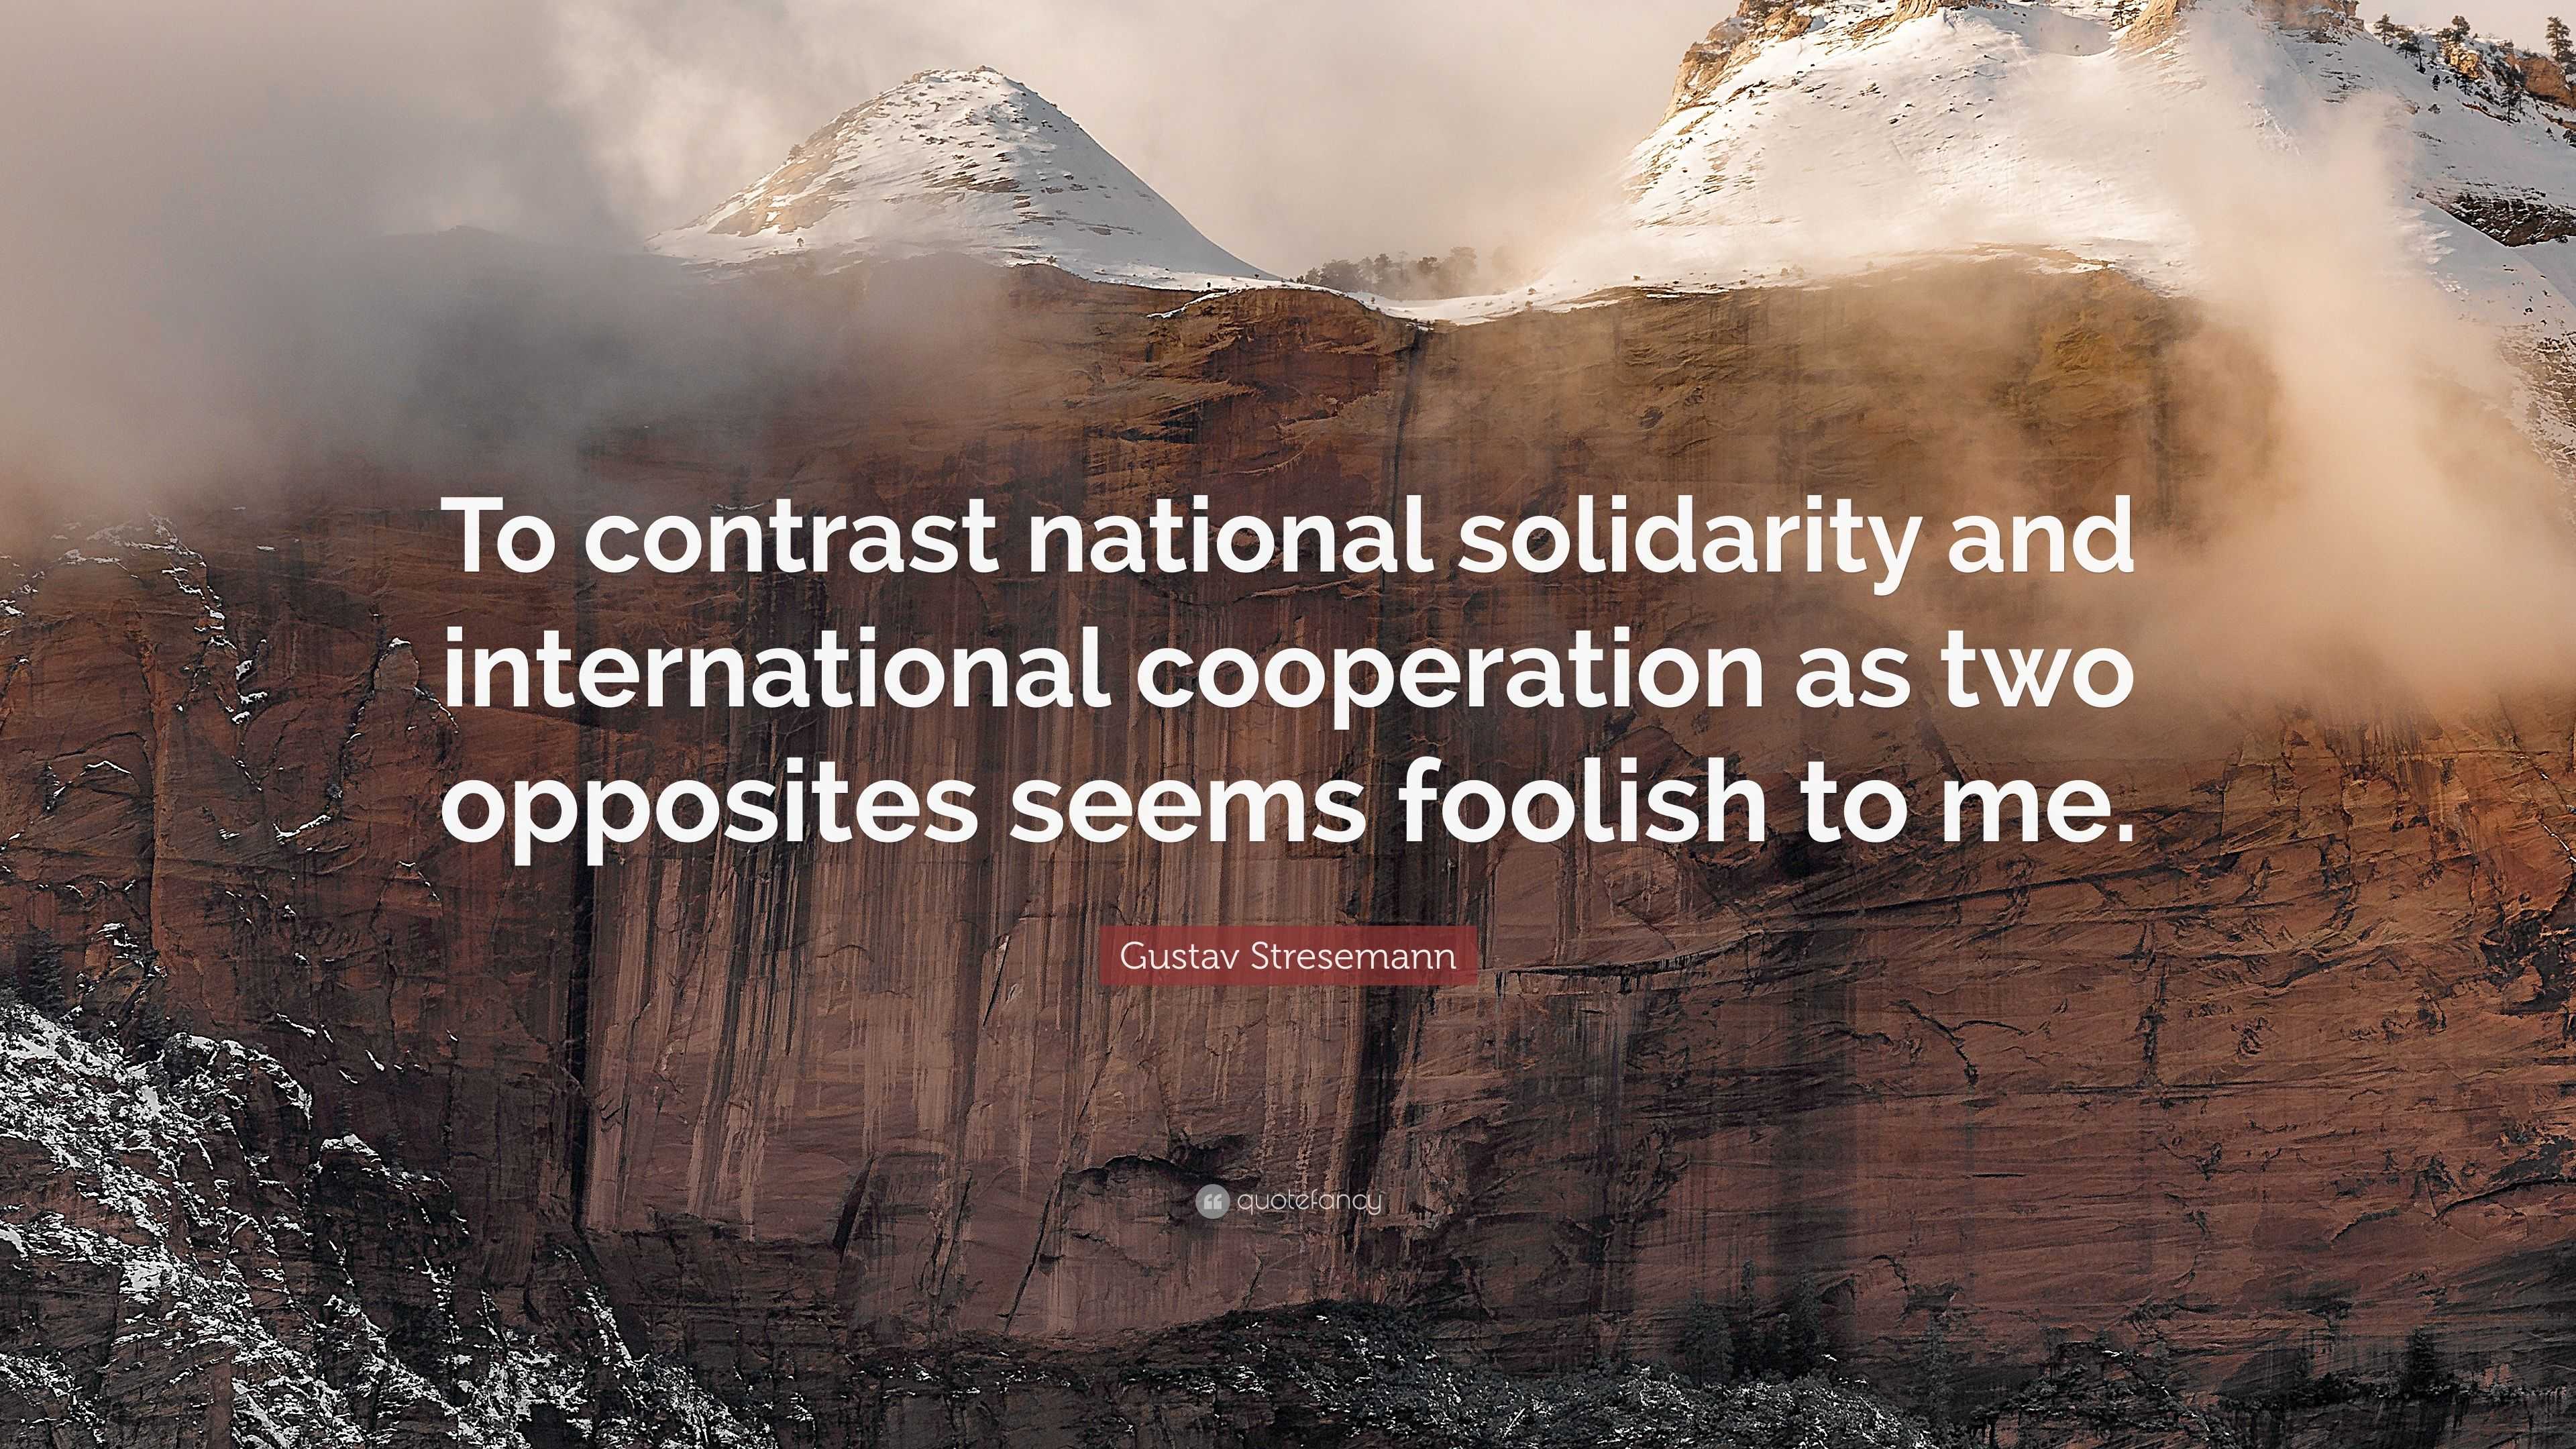 Gustav Stresemann Quote: “To contrast national solidarity and ...